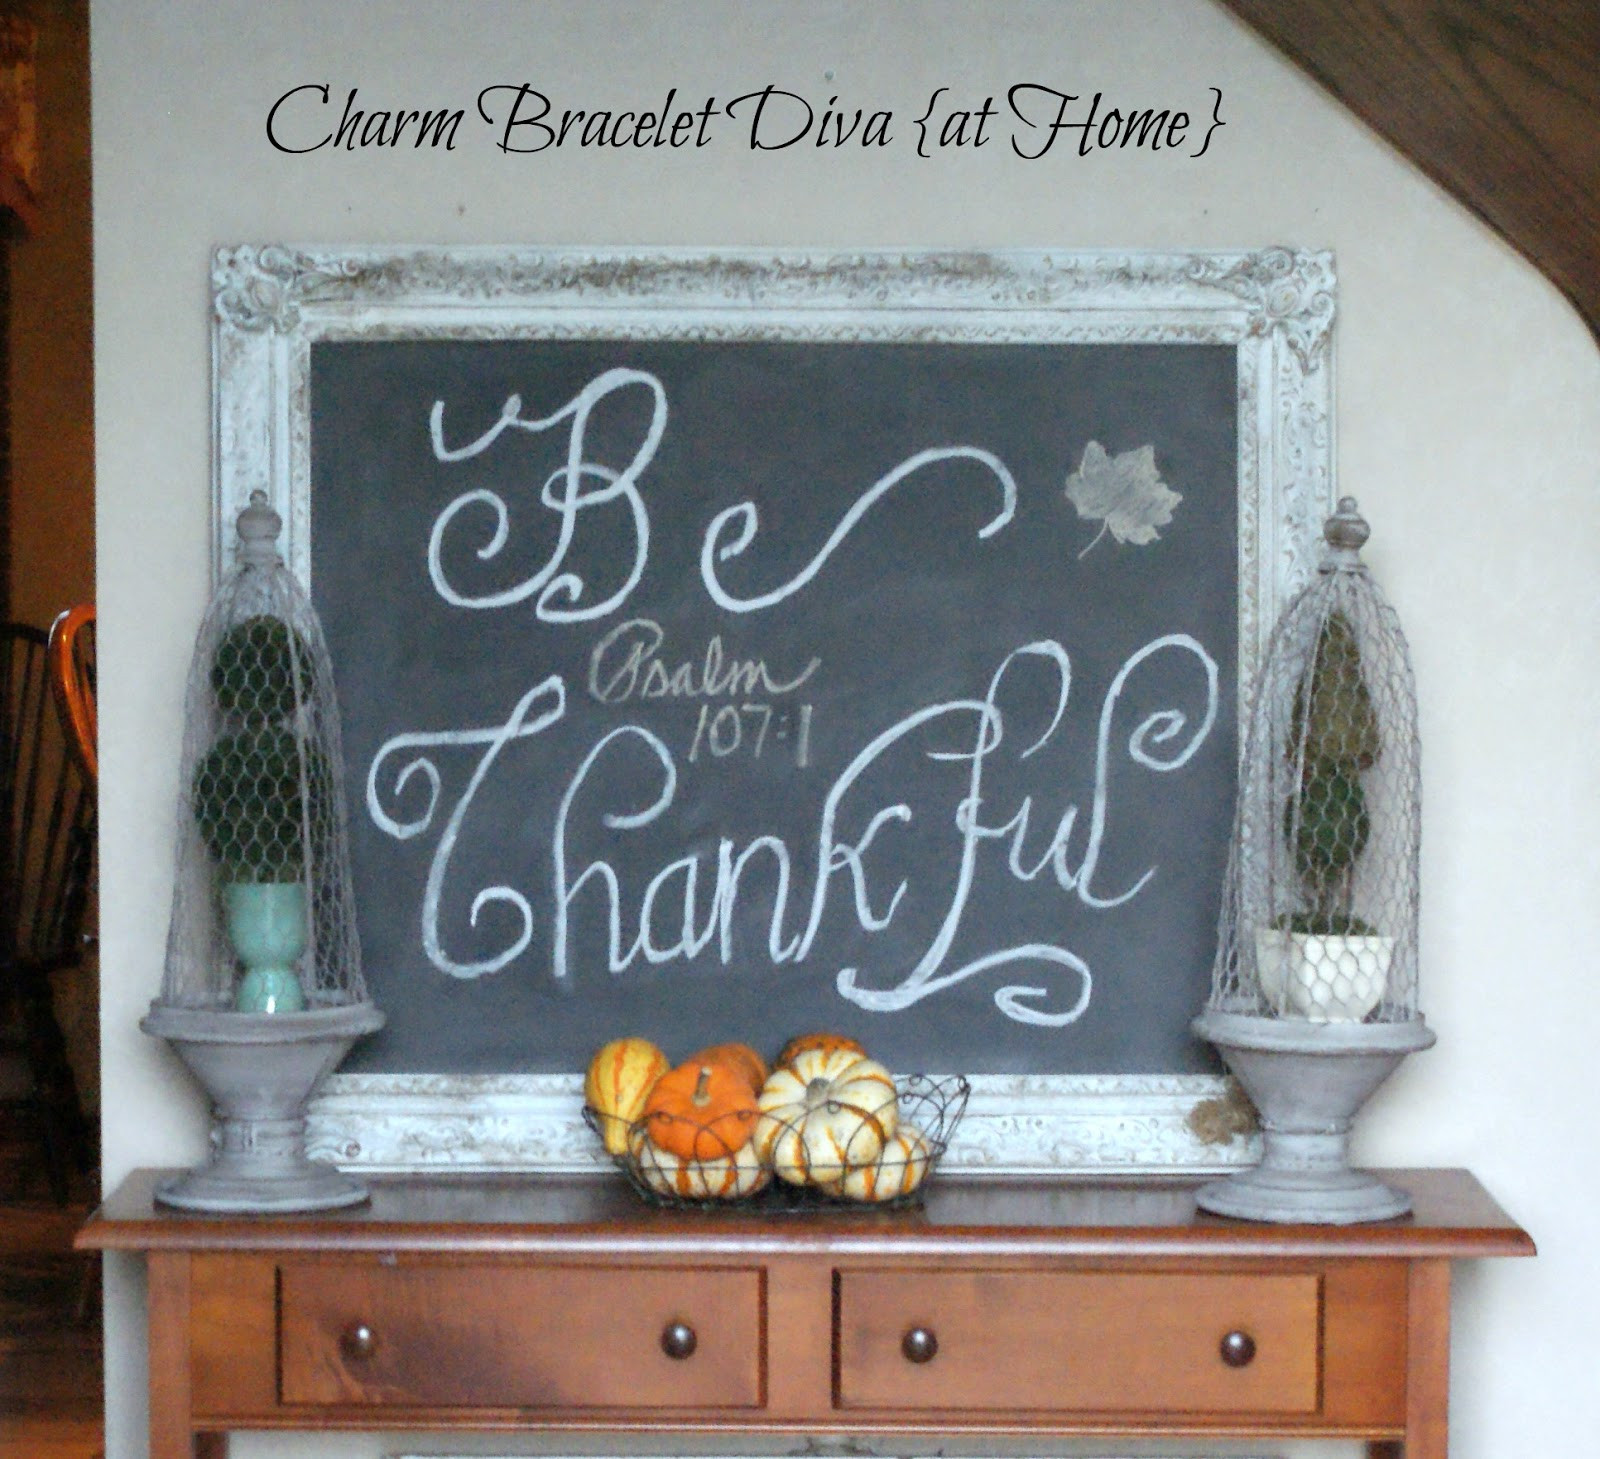 Thanksgiving Chalkboard Ideas
 Our Hopeful Home Some Thanksgiving Chalkboard Ideas